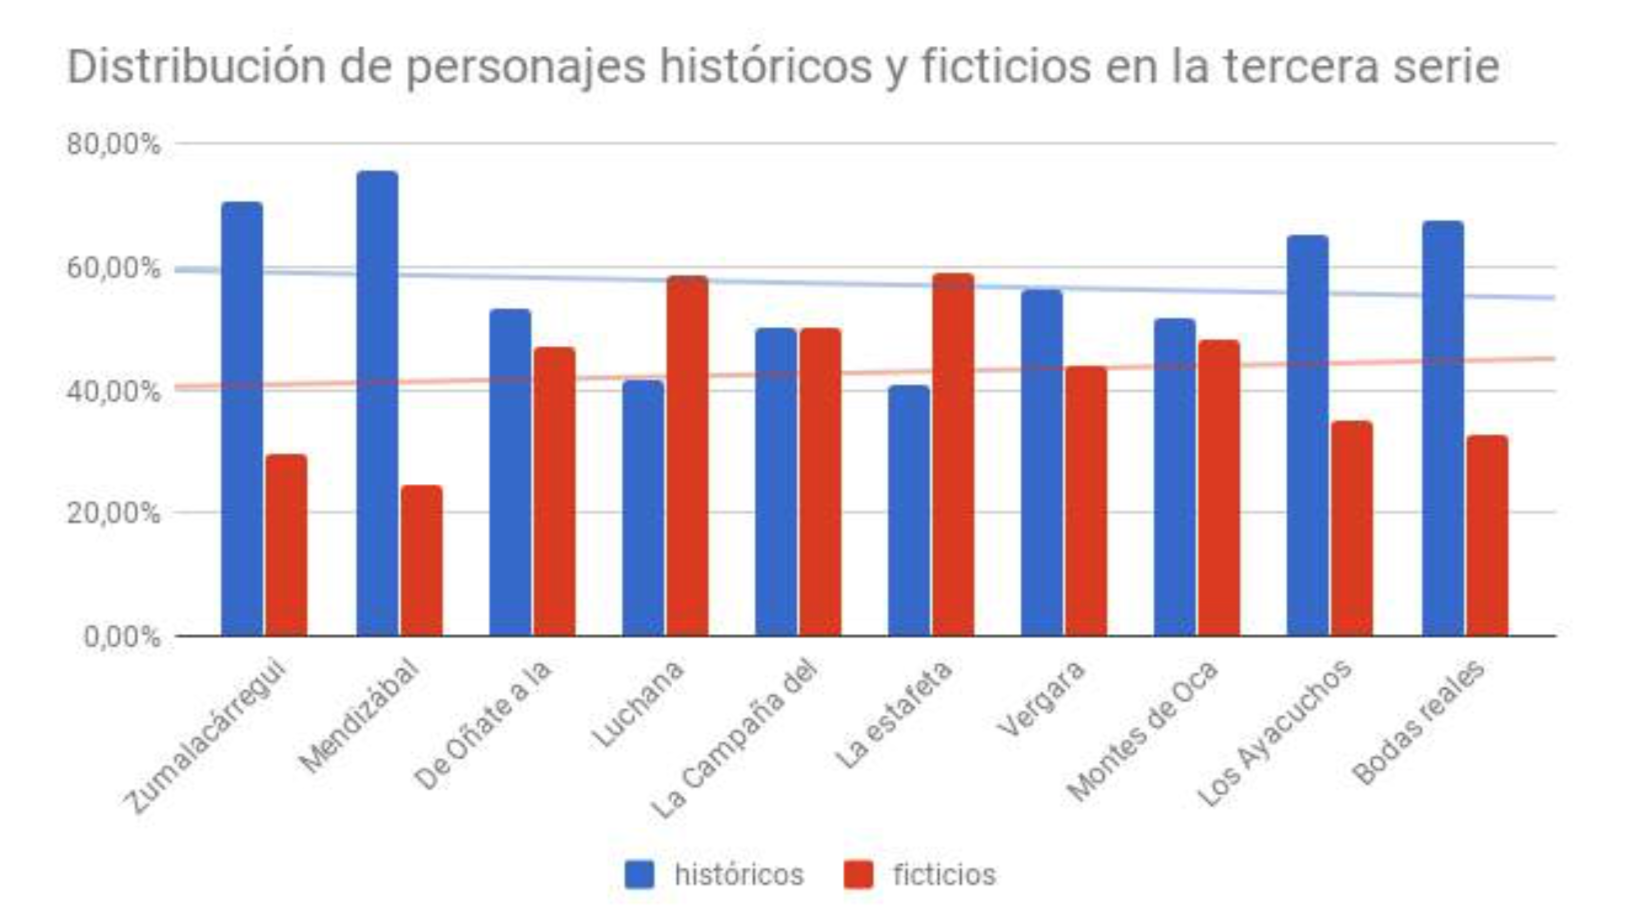 Distribution of historical and fictional characters in the third series